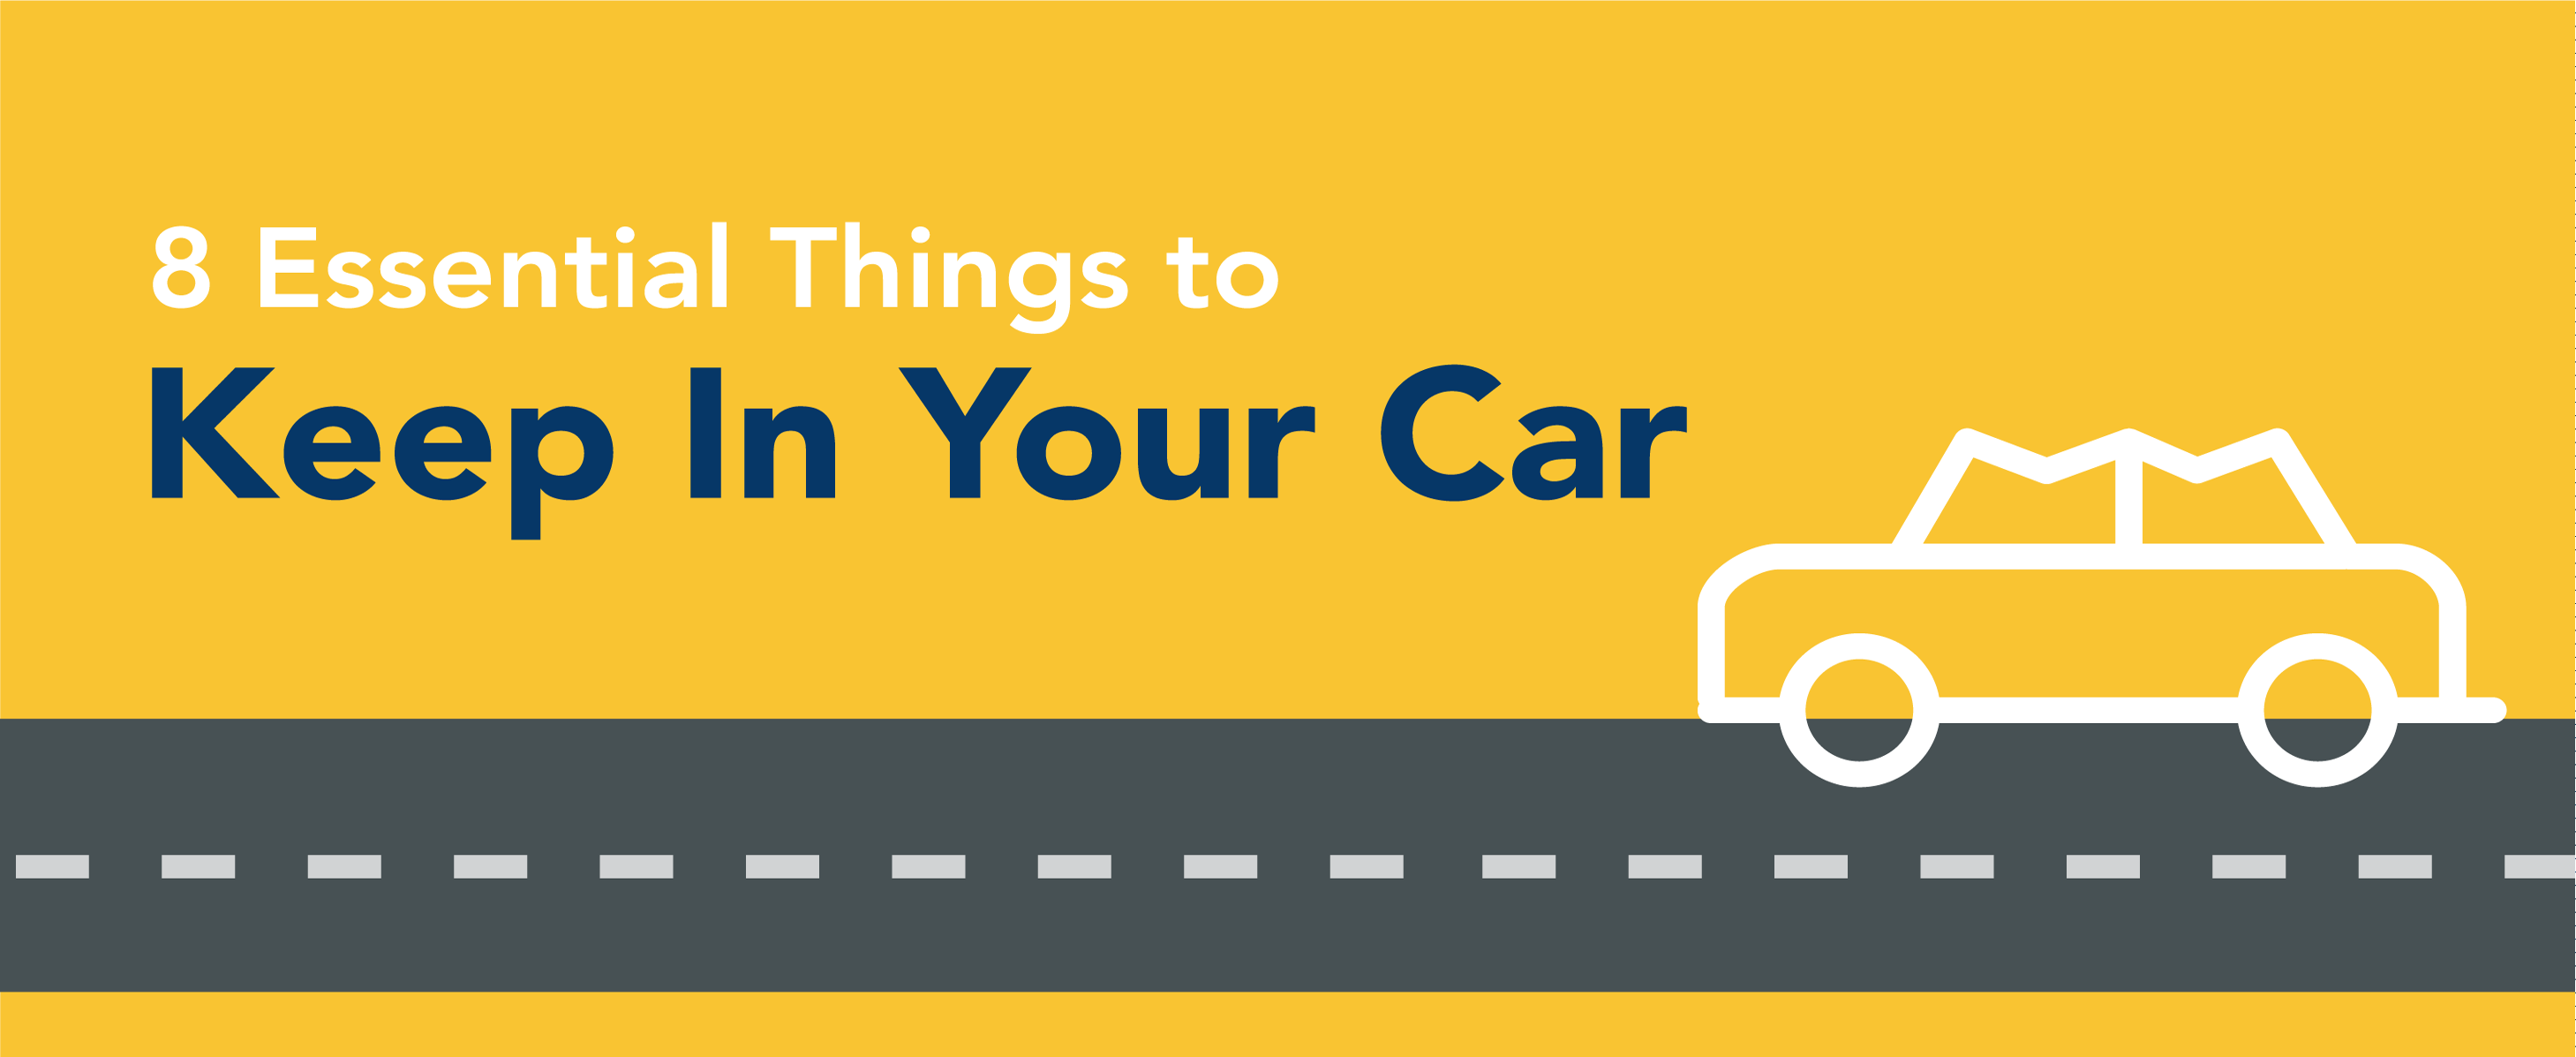 8 essential things to keep in your car.